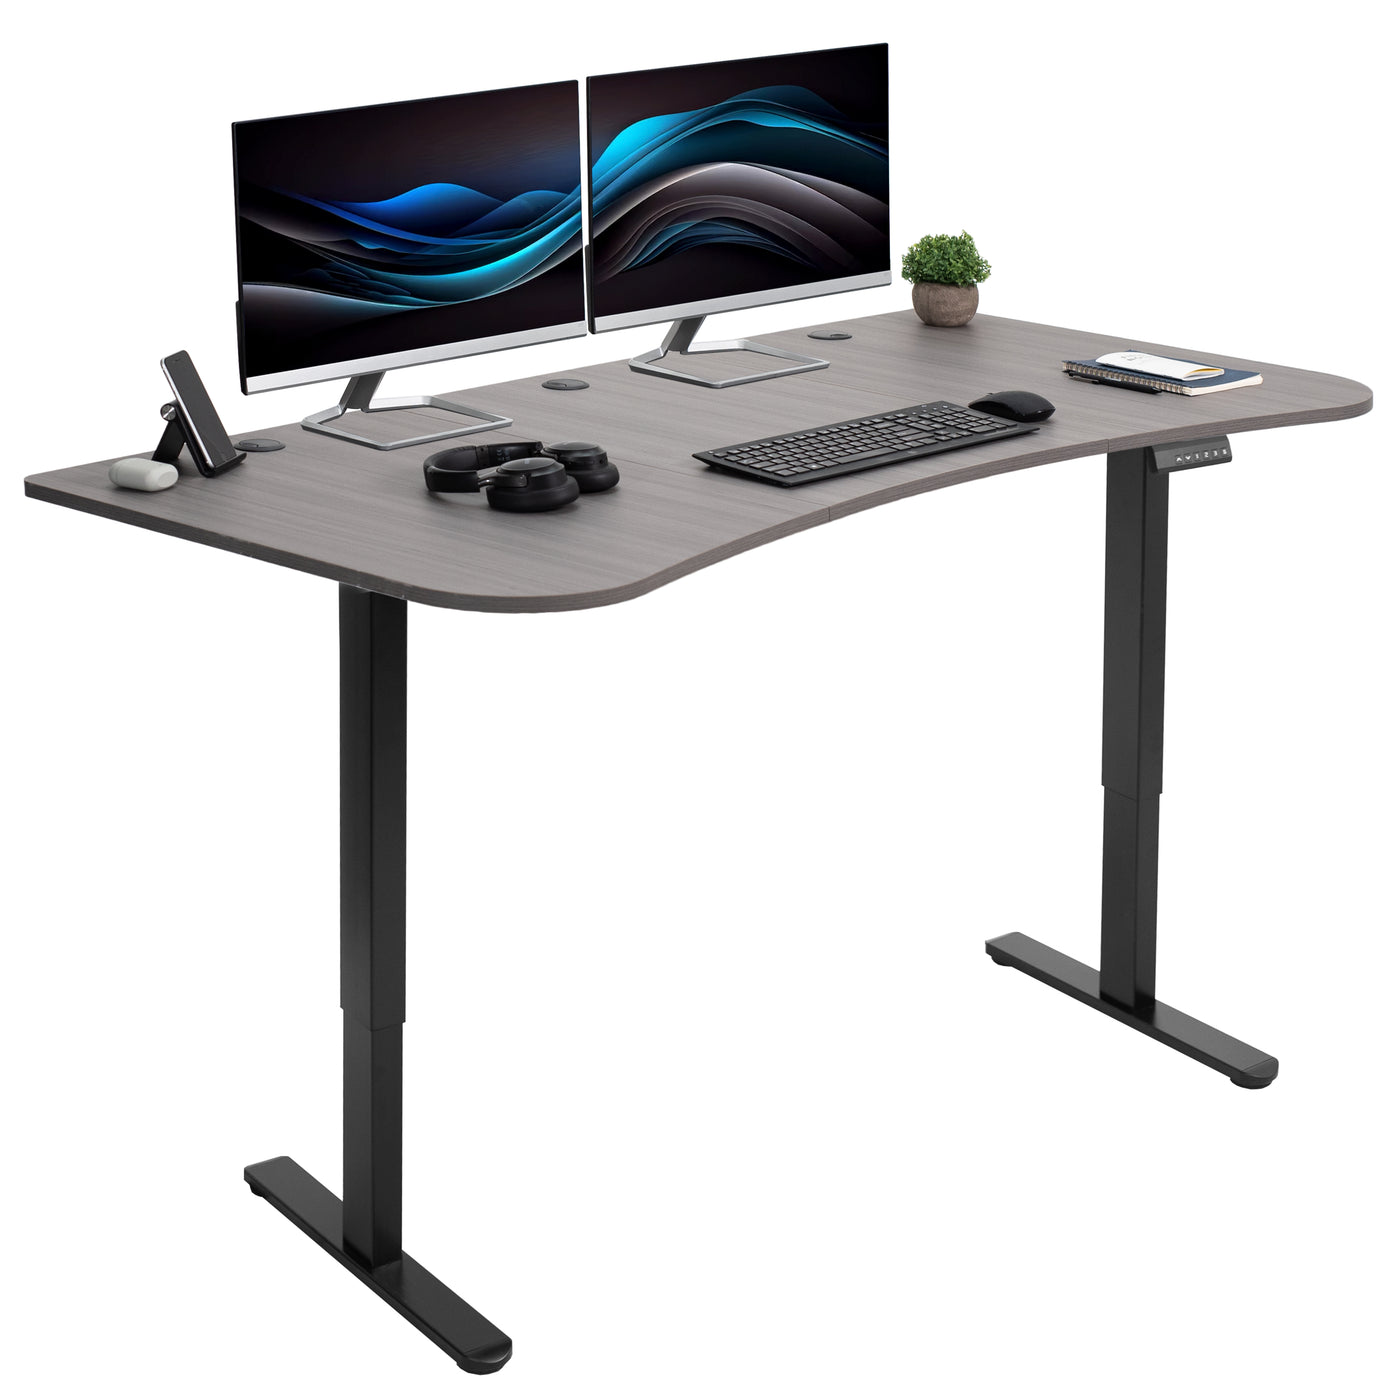 Heavy-duty electric sit to stand height adjustable ergonomic desk workstation with programmable memory controller for convenient productive workspace.